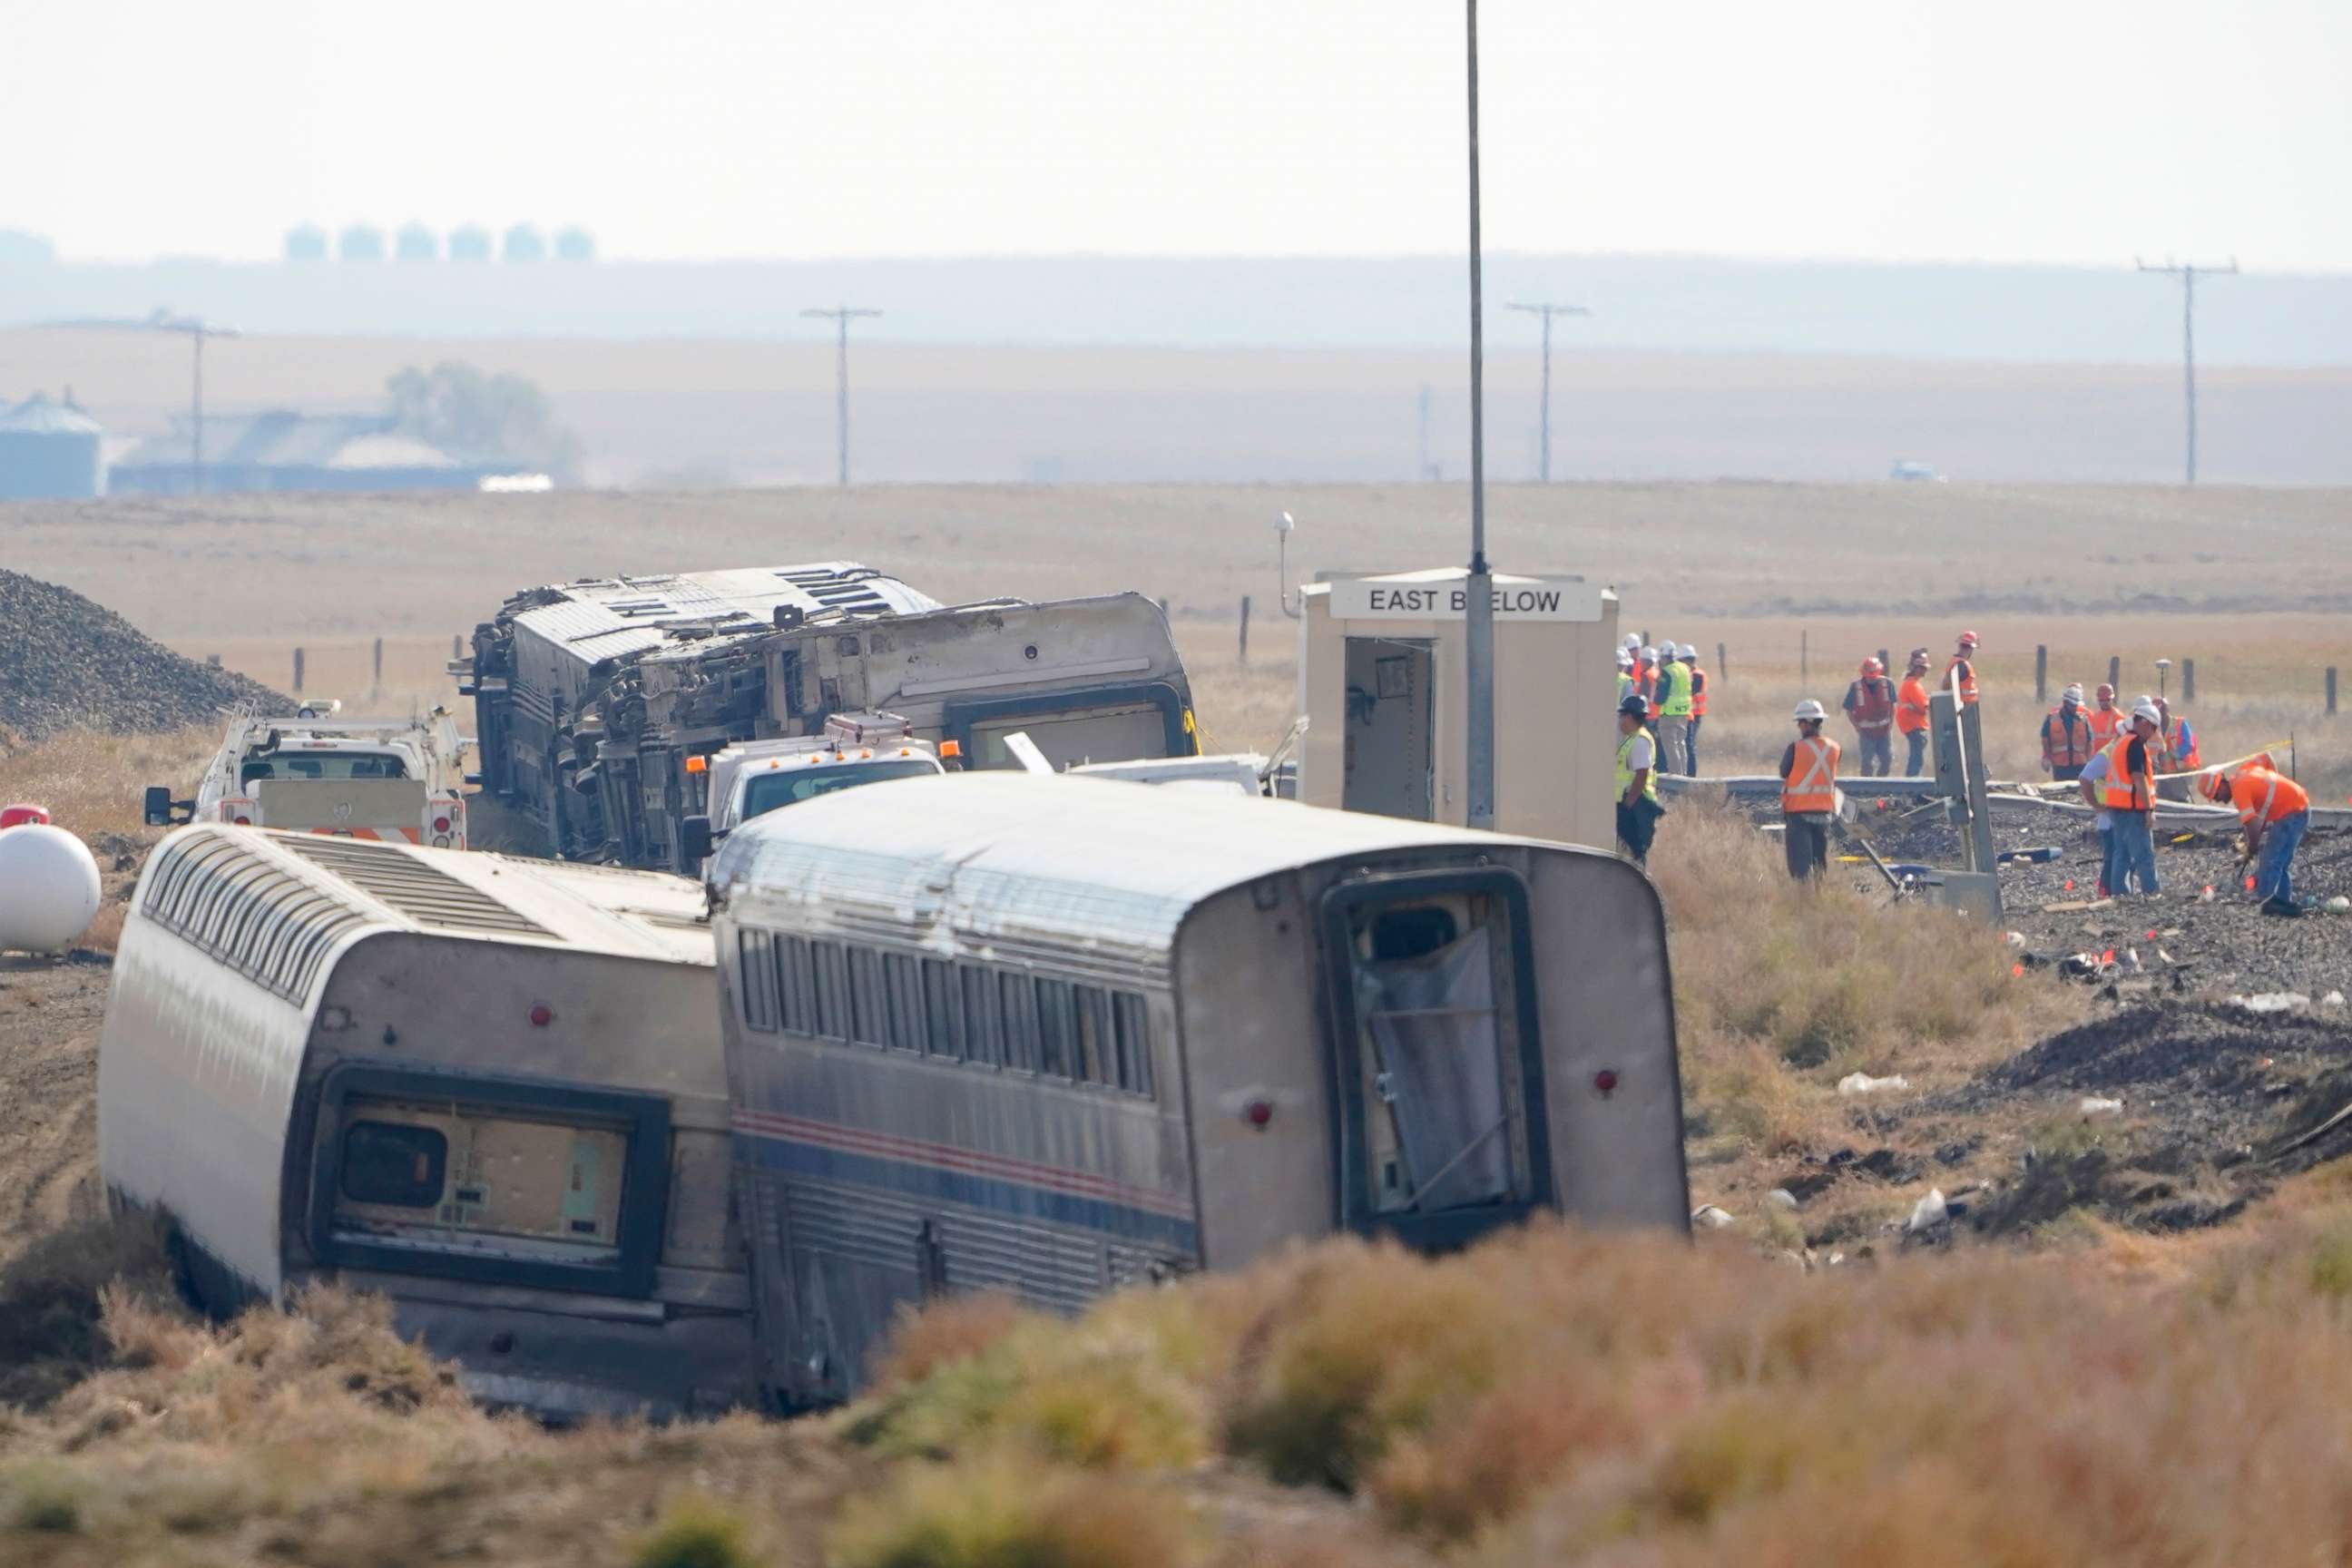 PHOTO: Workers stand near train tracks, Sept. 27, 2021, next to overturned cars from an Amtrak train that derailed Sept. 25, near Joplin, Mont., killing three people and injuring others.